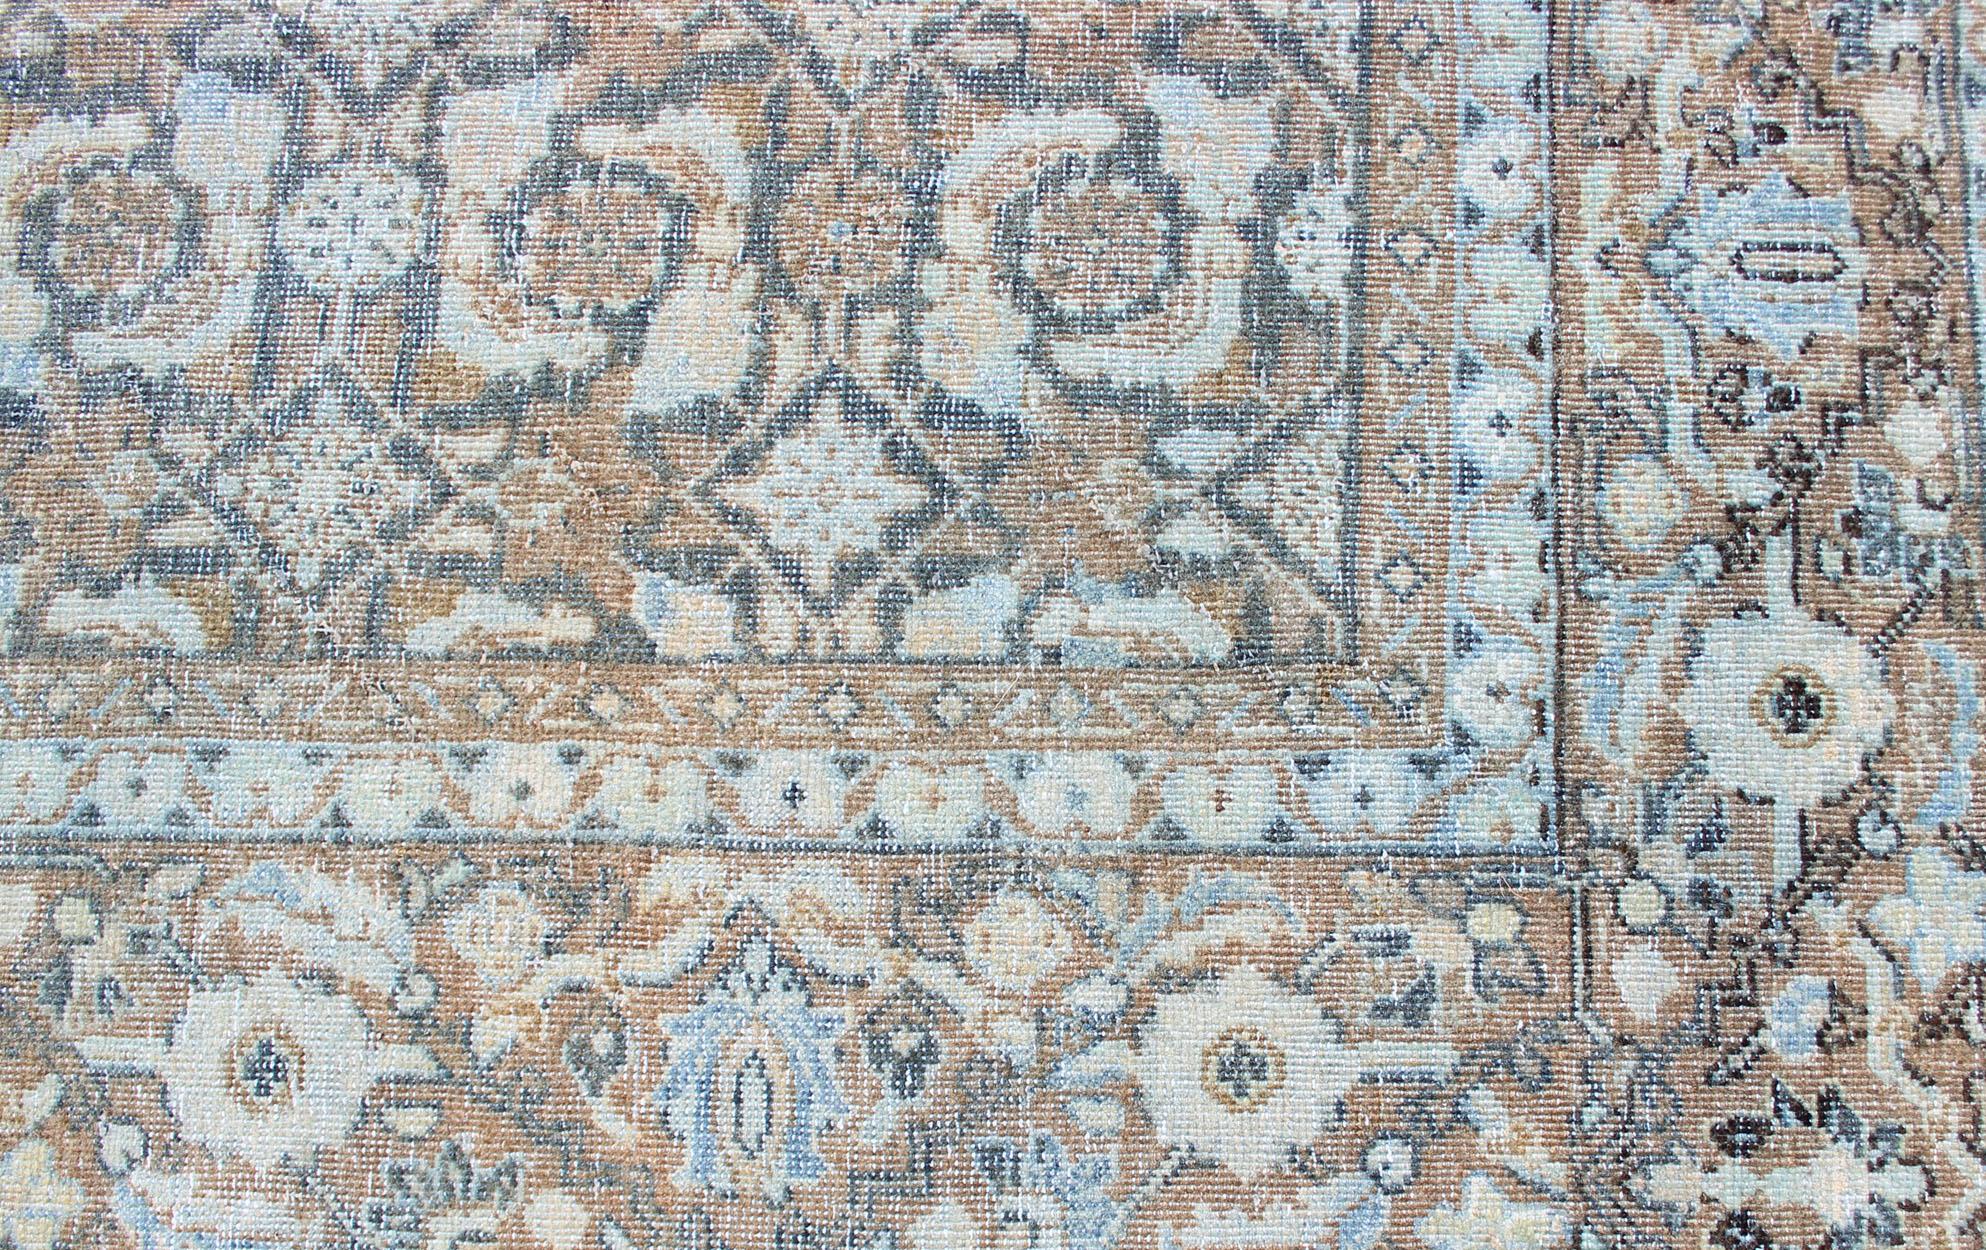 Antique Persian Sultanabad Distressed Rug in Blue, Blue Gray and Light Brown 12